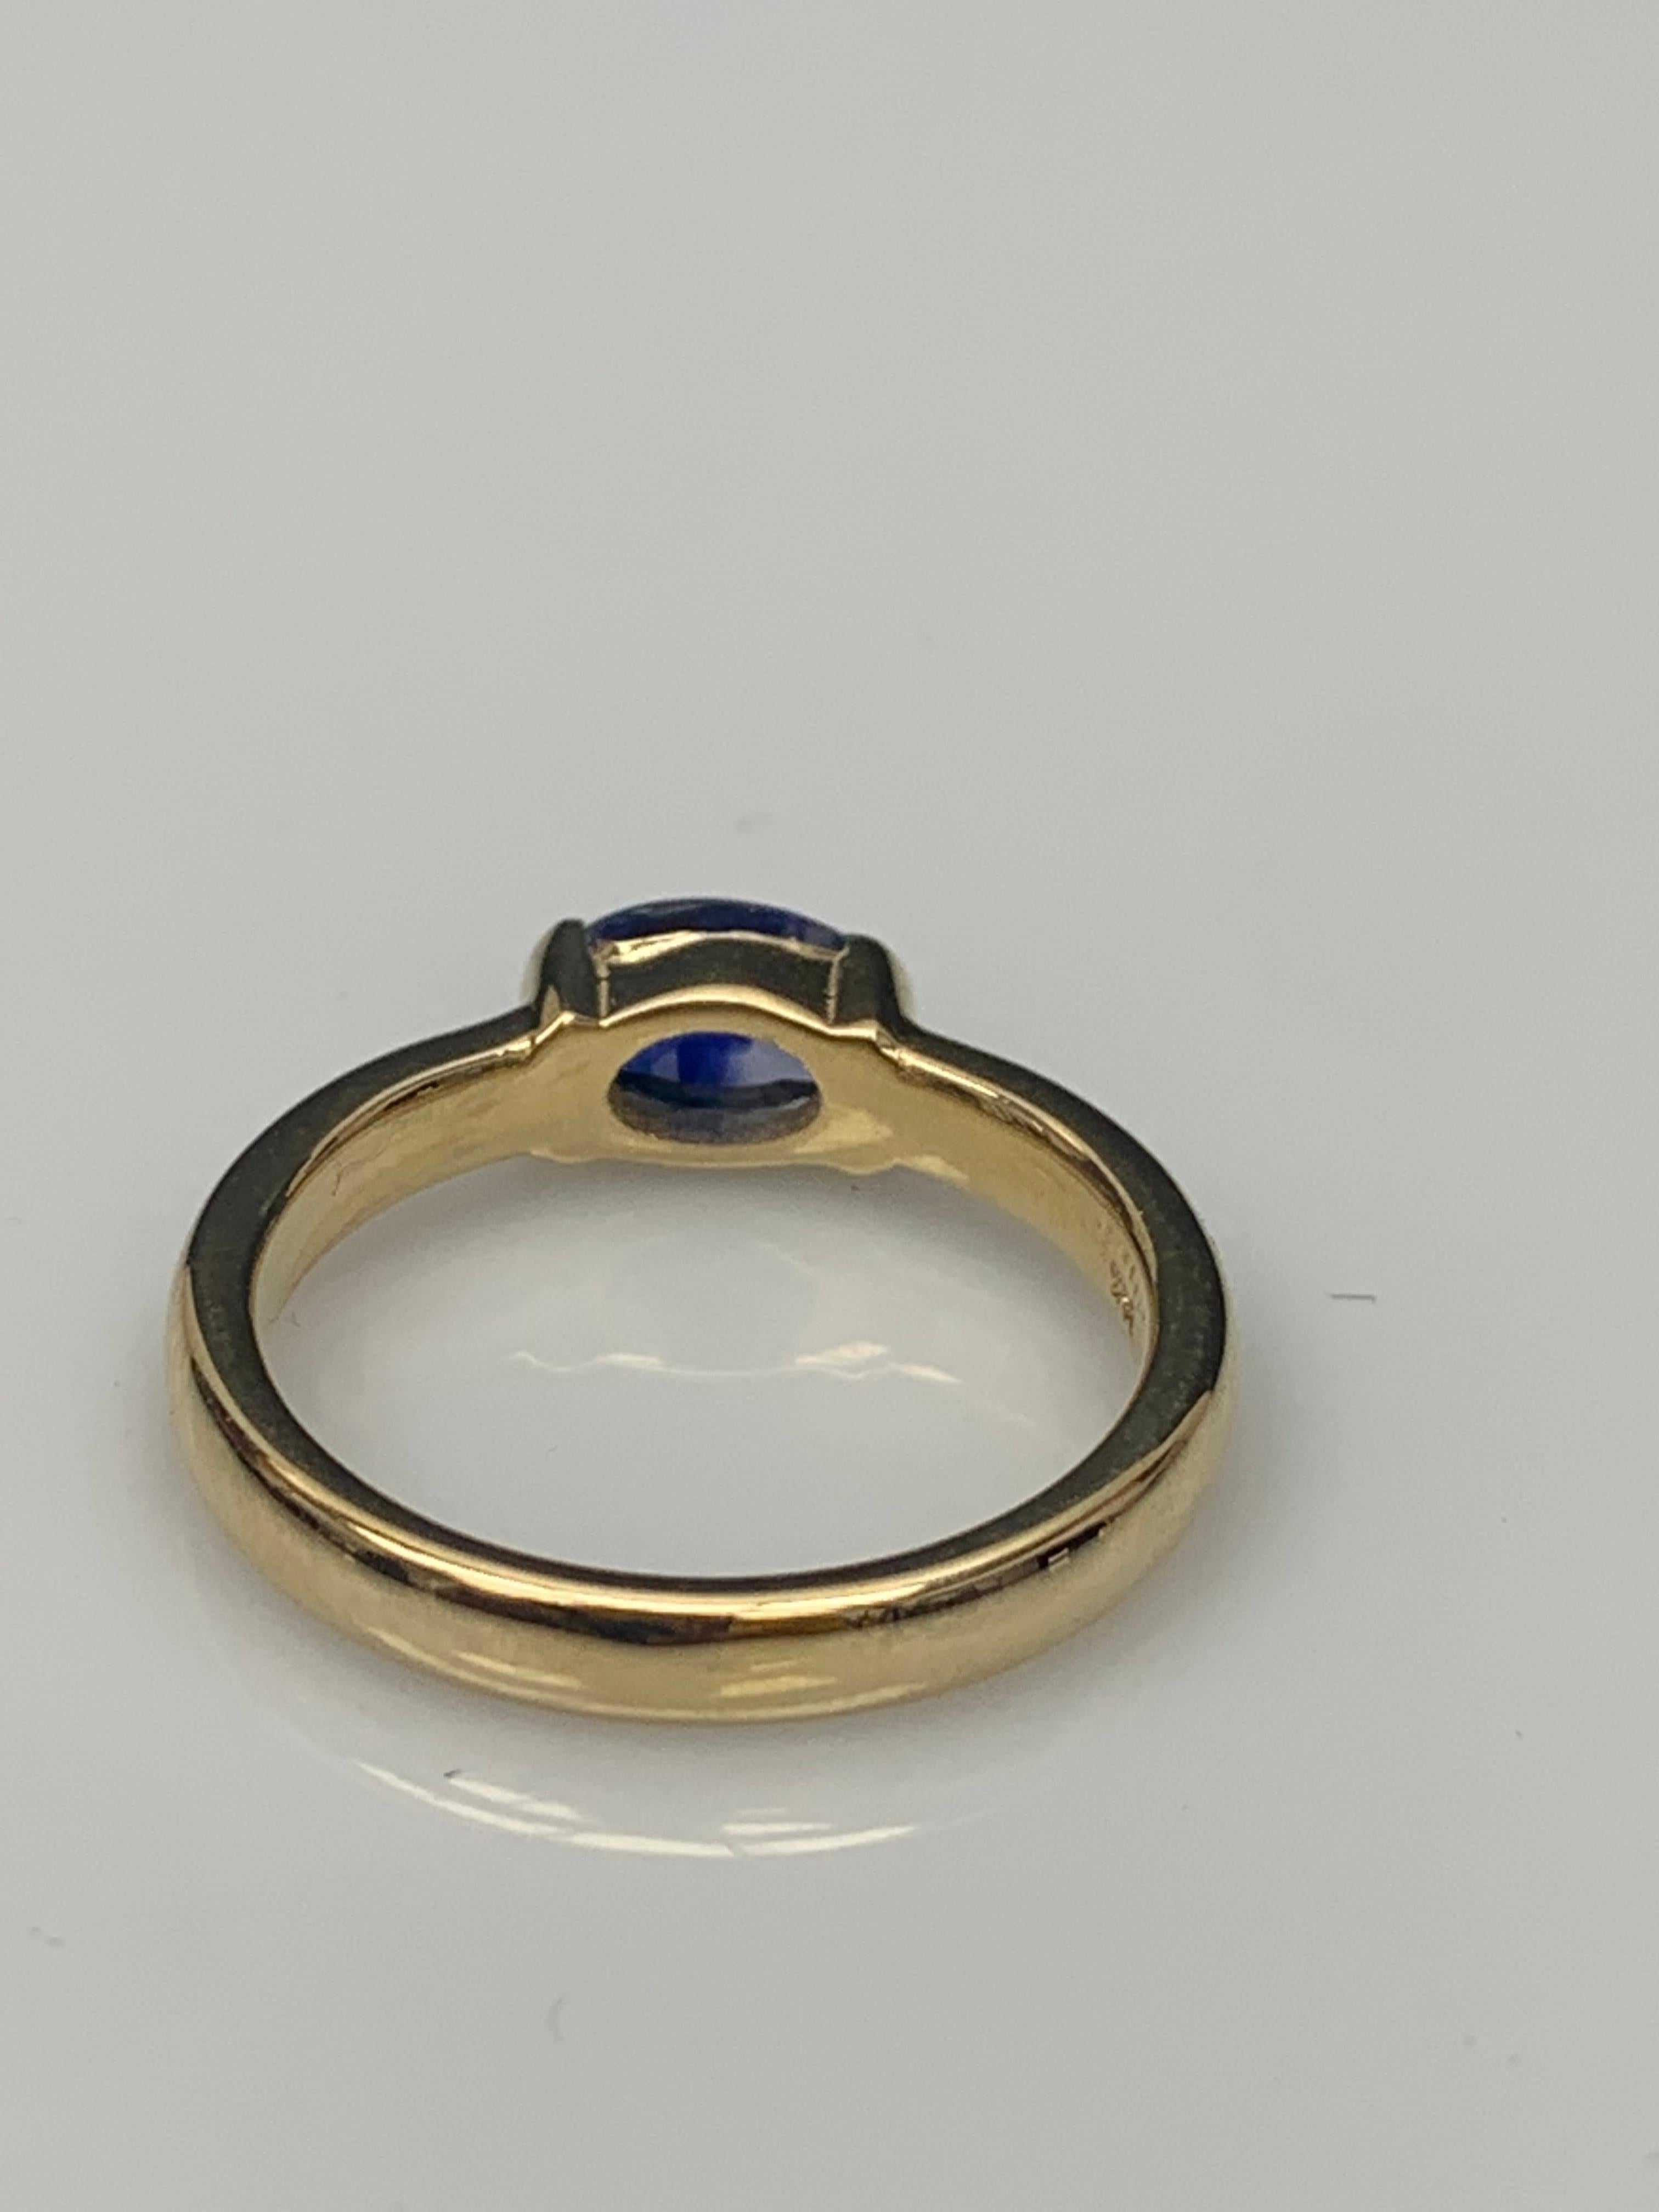 1.00 Carat Oval Cut Blue Sapphire Band Ring in 14K Yellow Gold For Sale 4